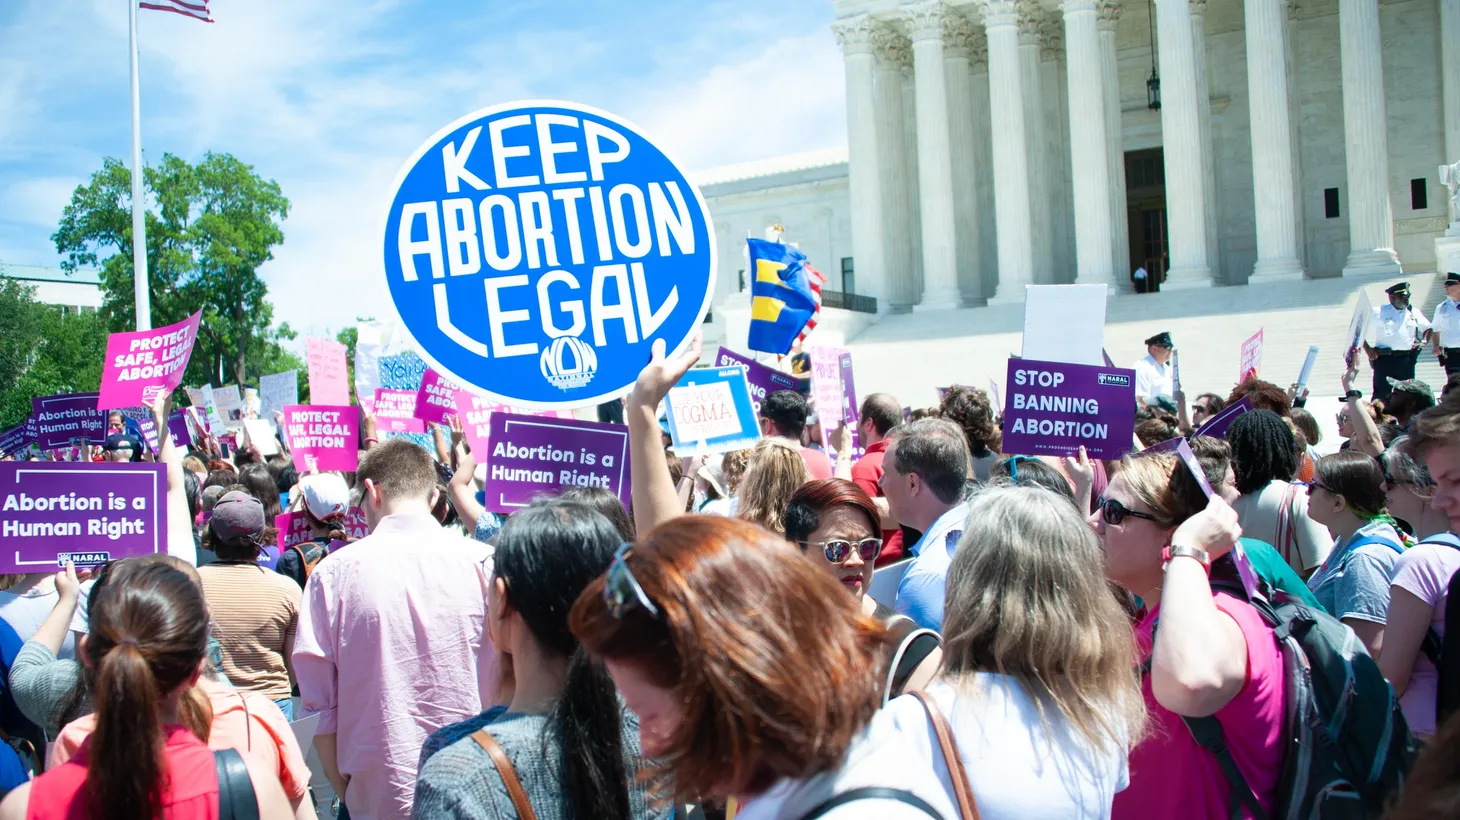 Activists outside the U.S. Supreme Court hold signs advocating for legal abortions, May 21, 2019.